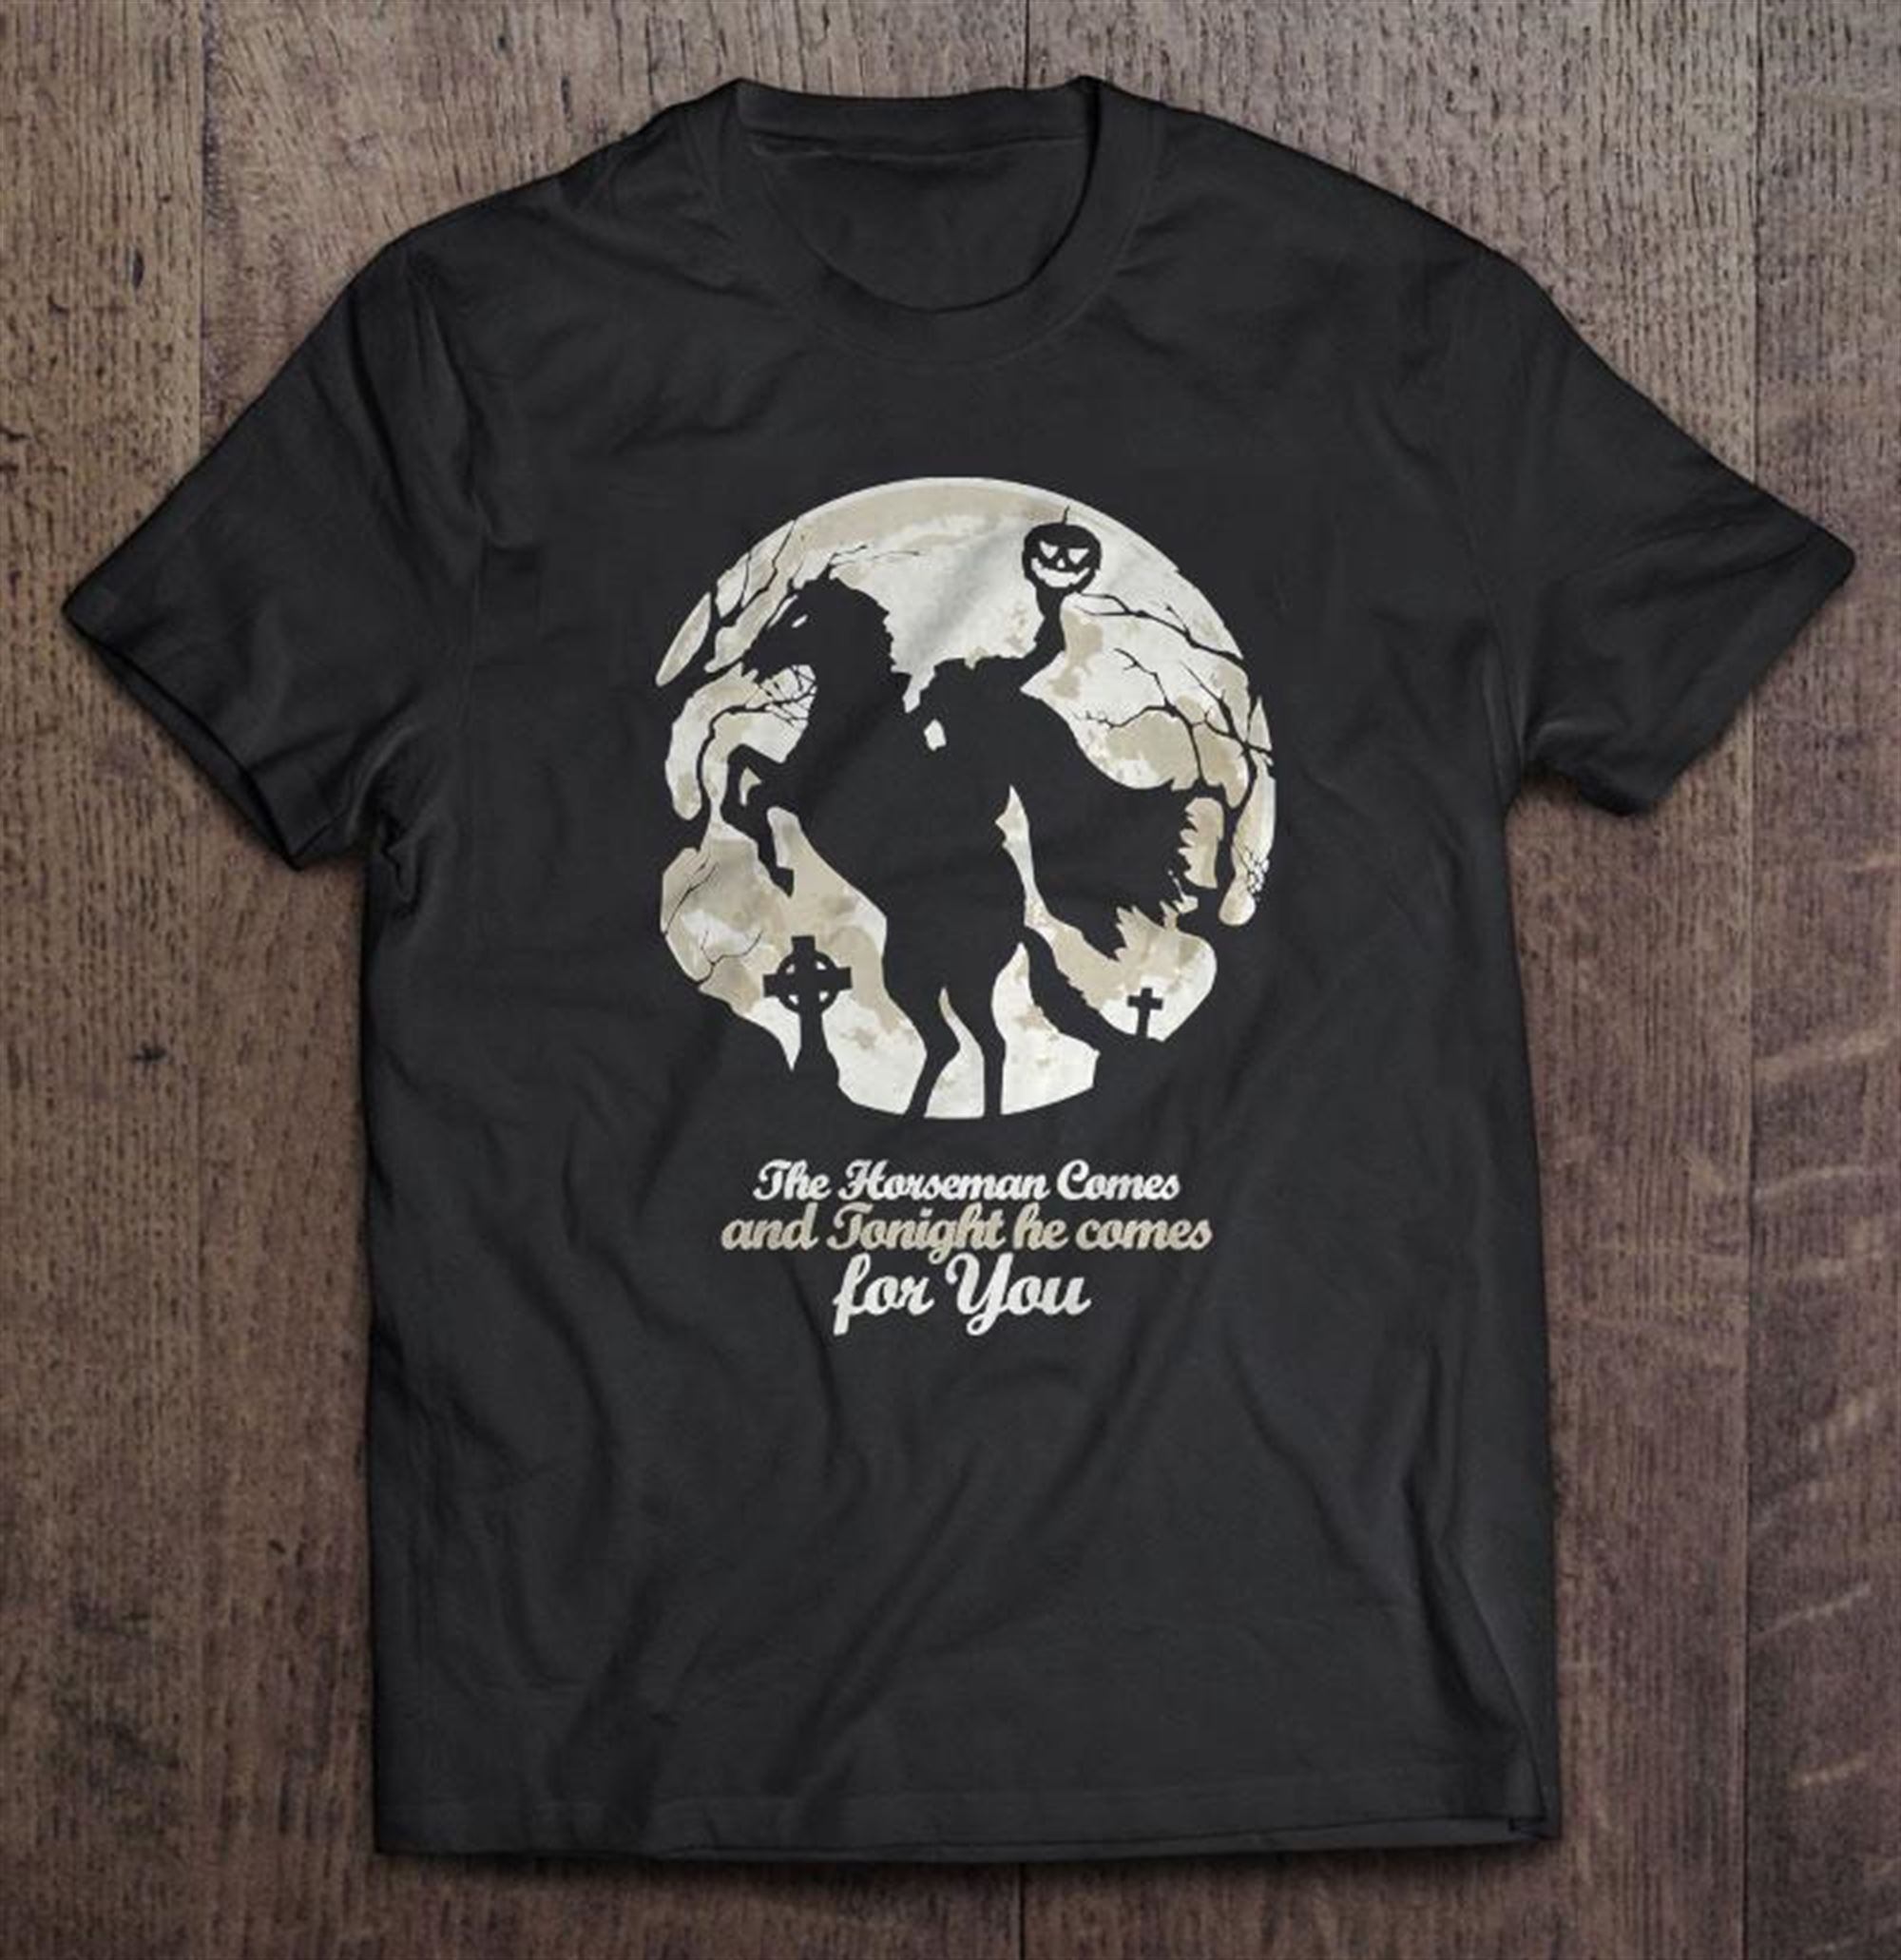 The Horseman Cames And Tonight He Cames For You Tri-blend T-shirt Plus Size Up To 5xl